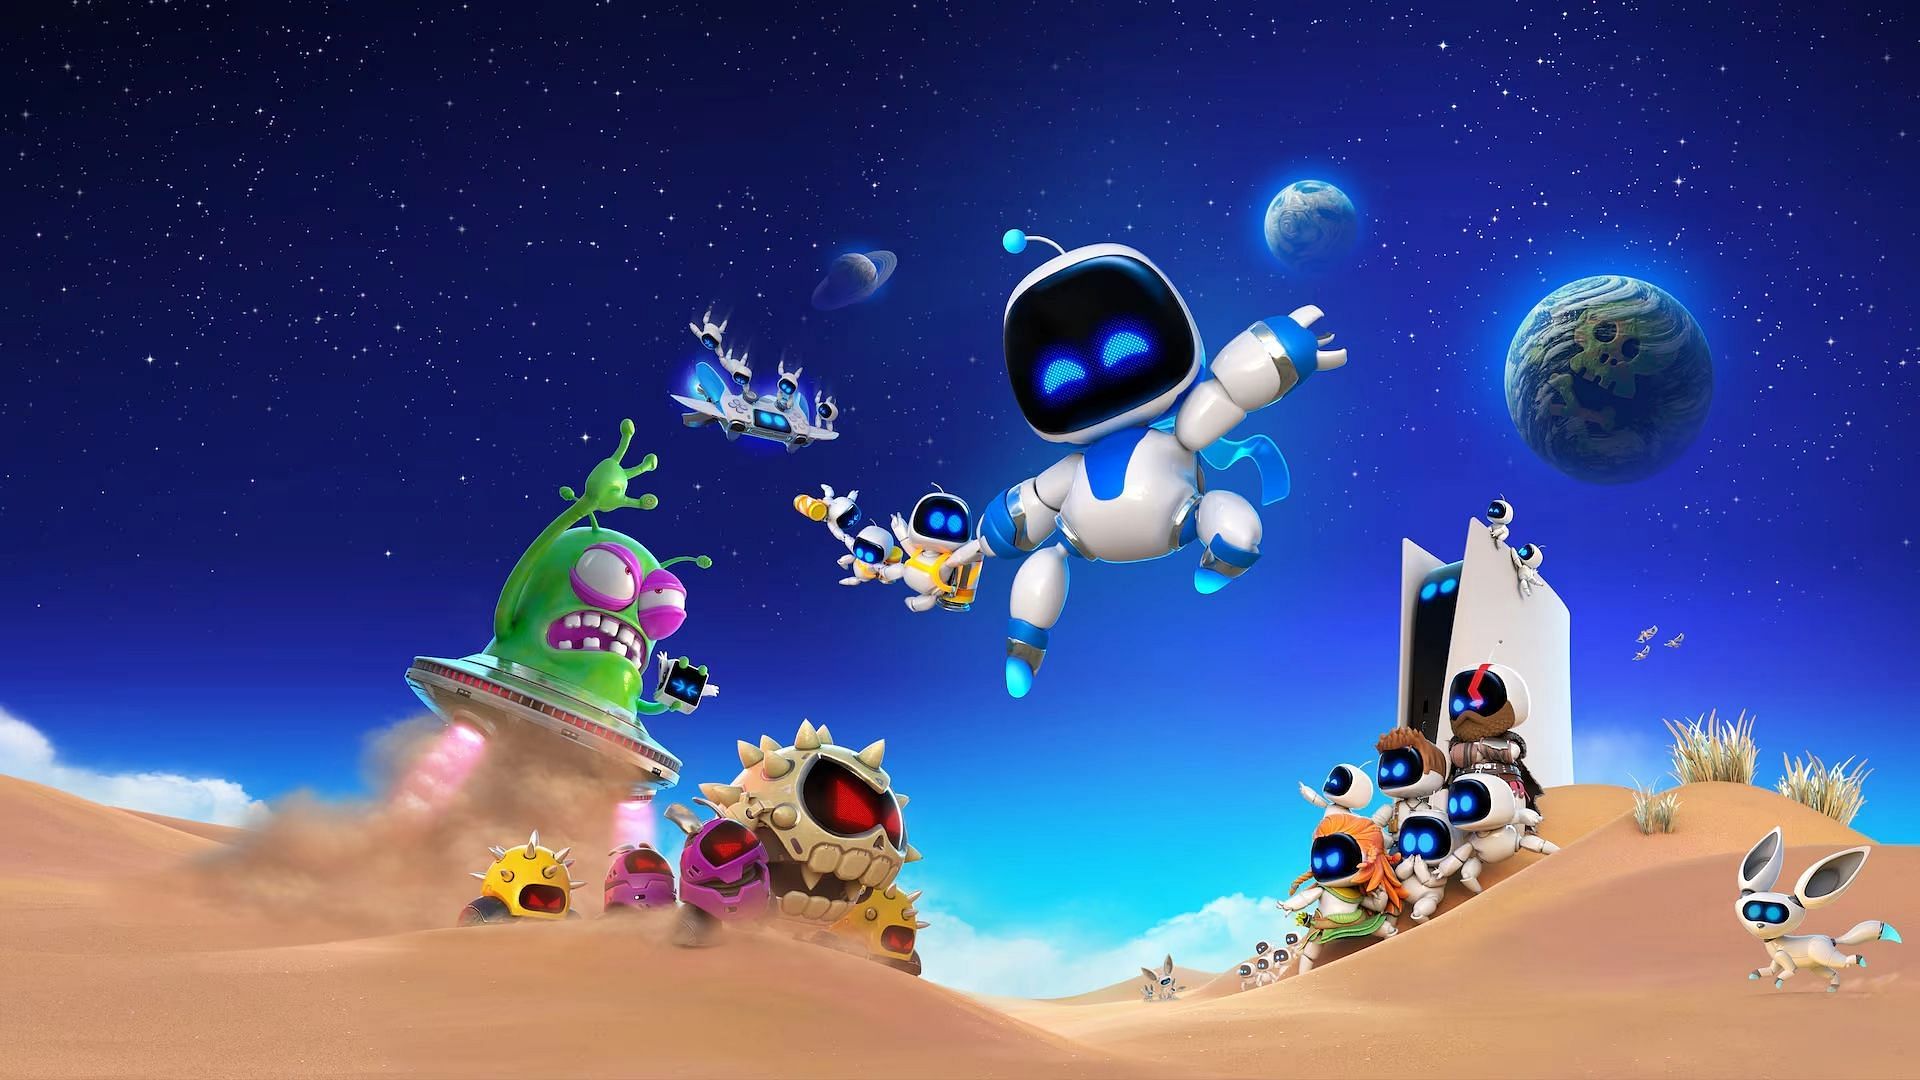 Astro Bot pre-orders are now live on PlayStation Store (Image via Sony Interactive Entertainment)